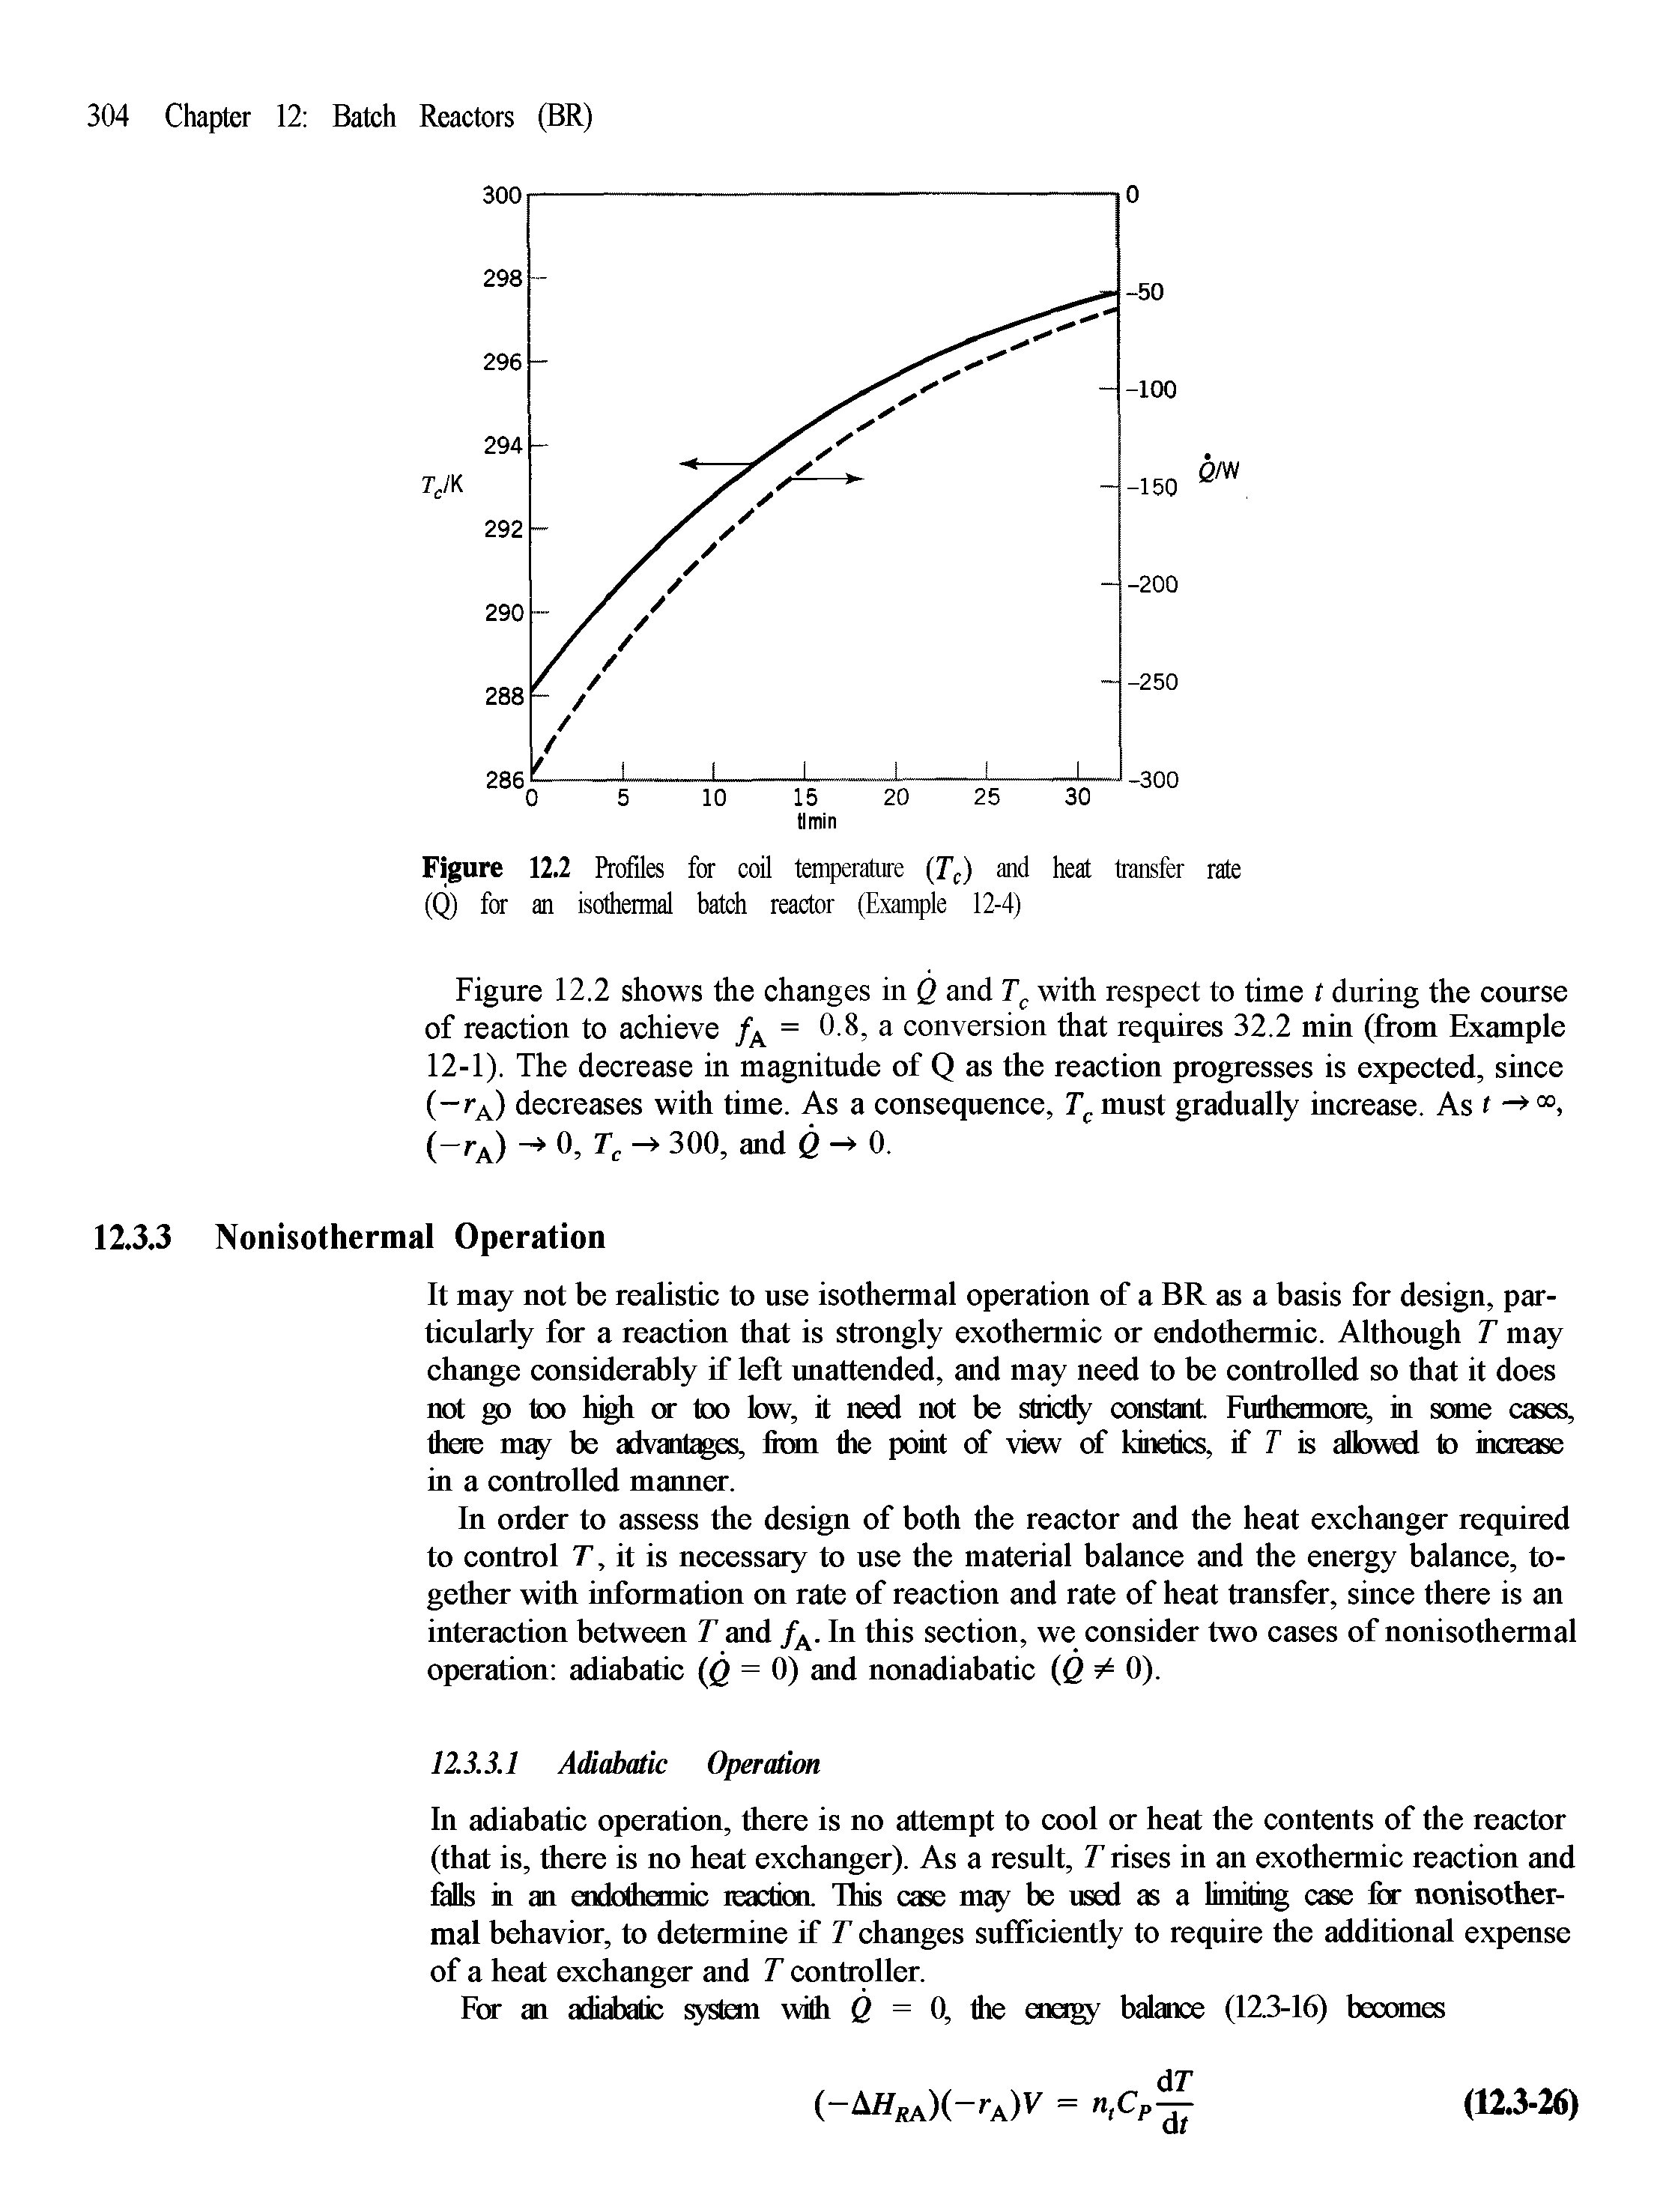 Figure 12.2 Profiles for coil temperature (Tc) and heat transfer rate (Q) for an isothermal batch reactor (Example 12-4)...